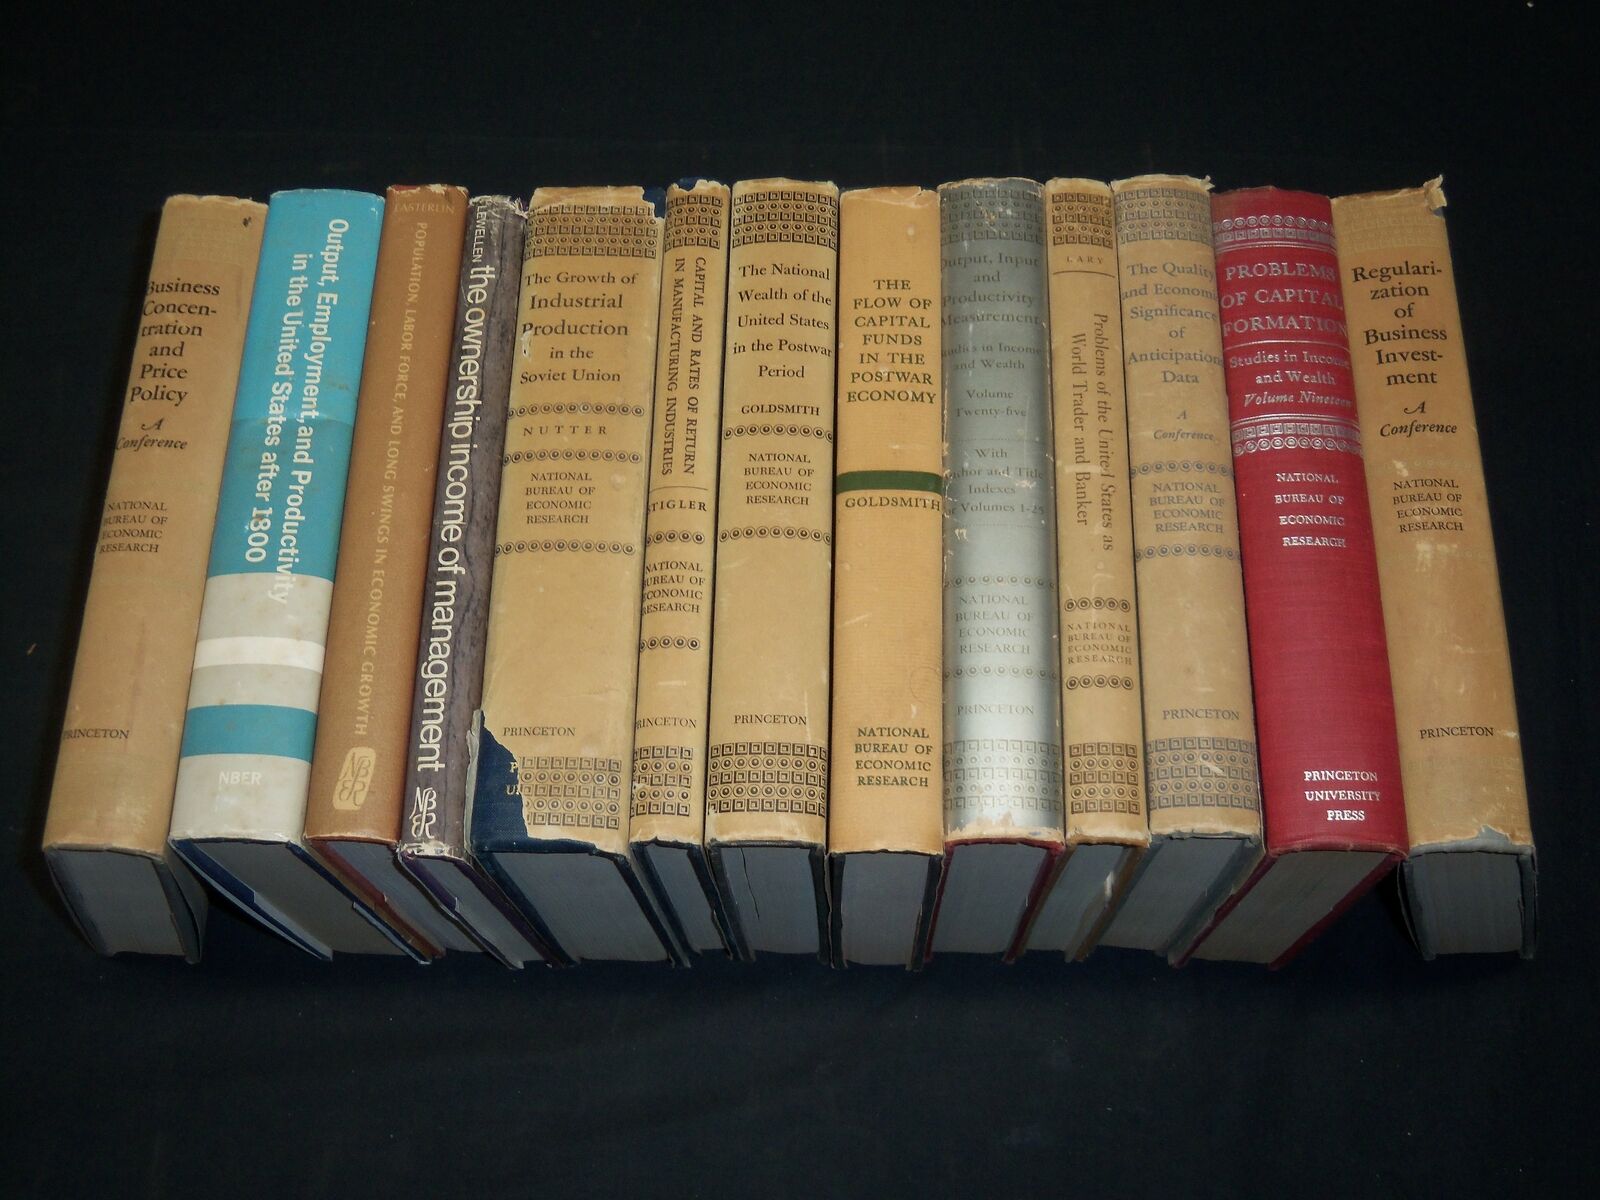 1954-1971 NATIONAL BUREAU OF ECONOMIC RESEARCH HARDCOVER BOOKS LOT OF 13 - R 550